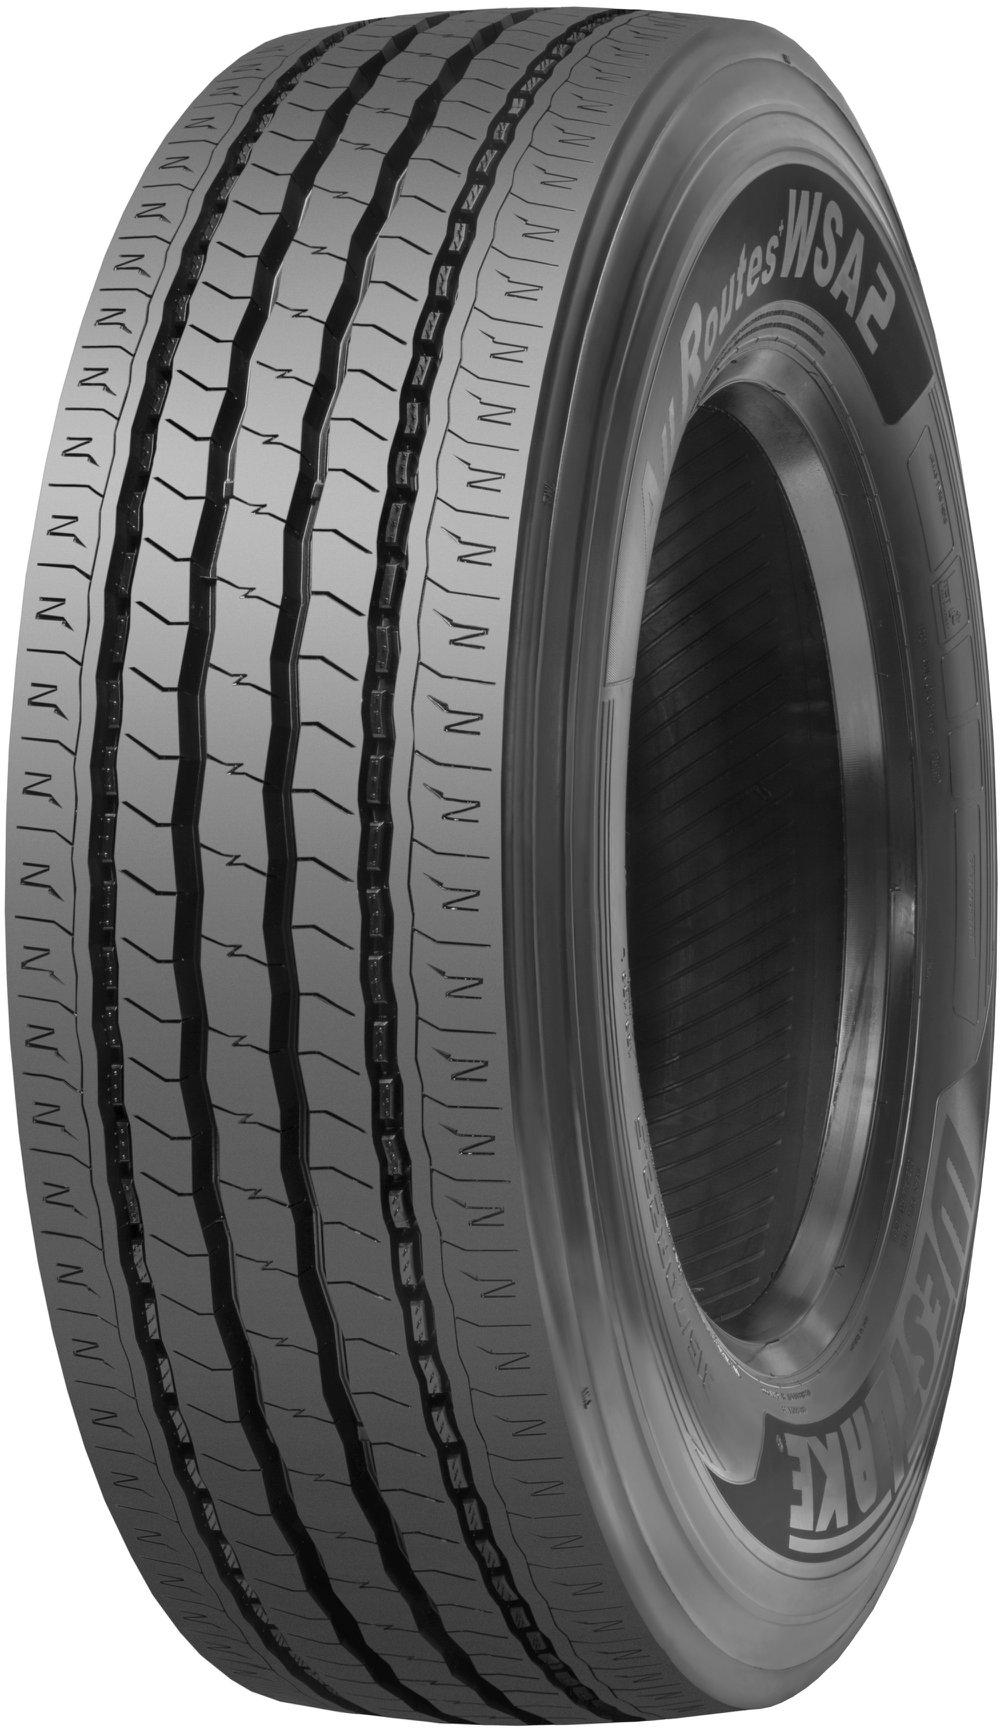 product_type-heavy_tires WESTLAKE WSA2 215/75 R17.5 128M